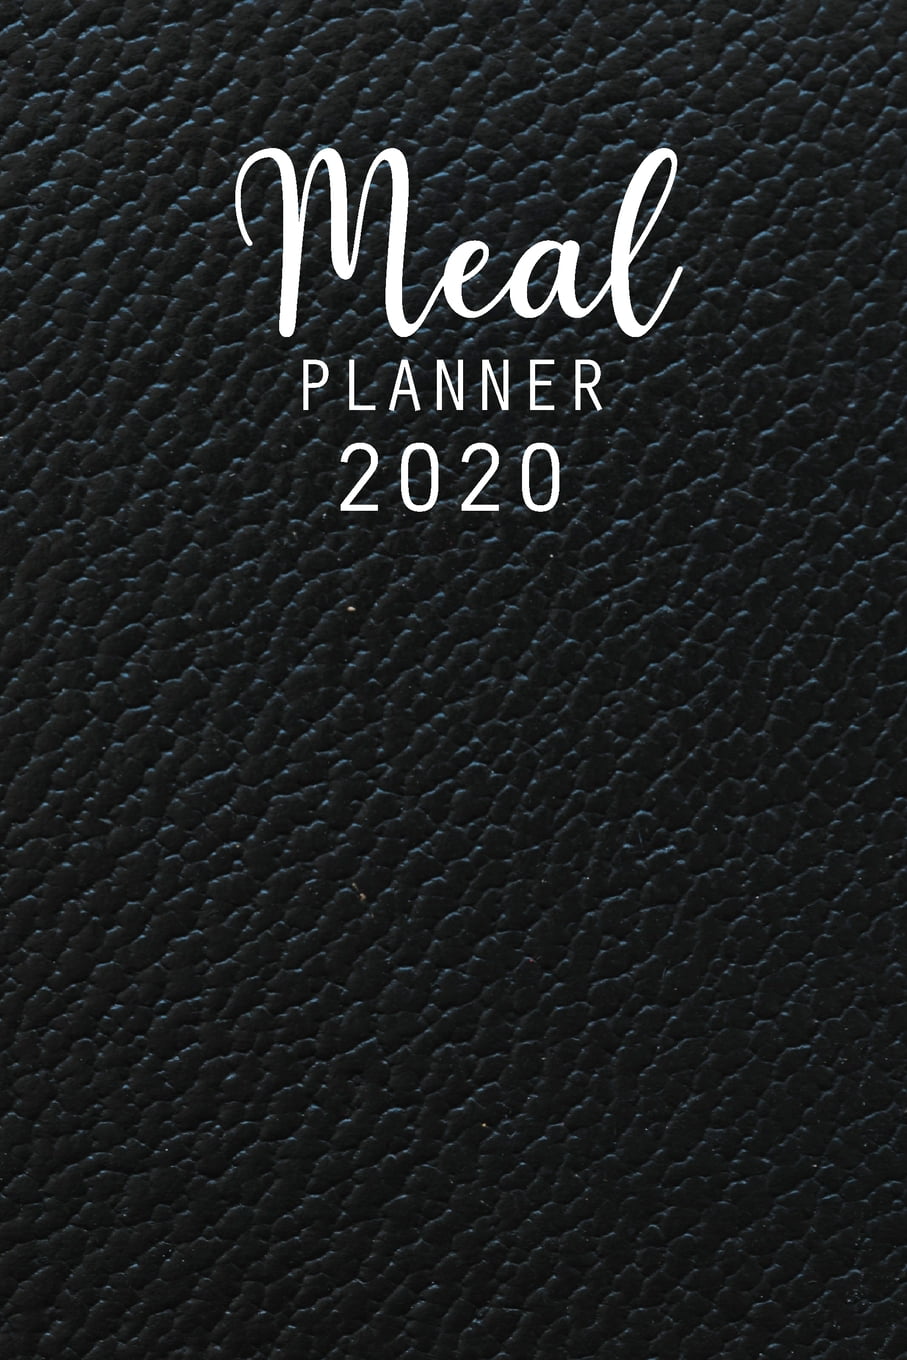 Meal Planner Menu Ideas and Shopping Lists 53 Weeks For Track and Plan Your Meals Prep Foods Calendars Planning Logs What to Eat Pad Weekly Planning Grocery List Records Journal Diary Notebook